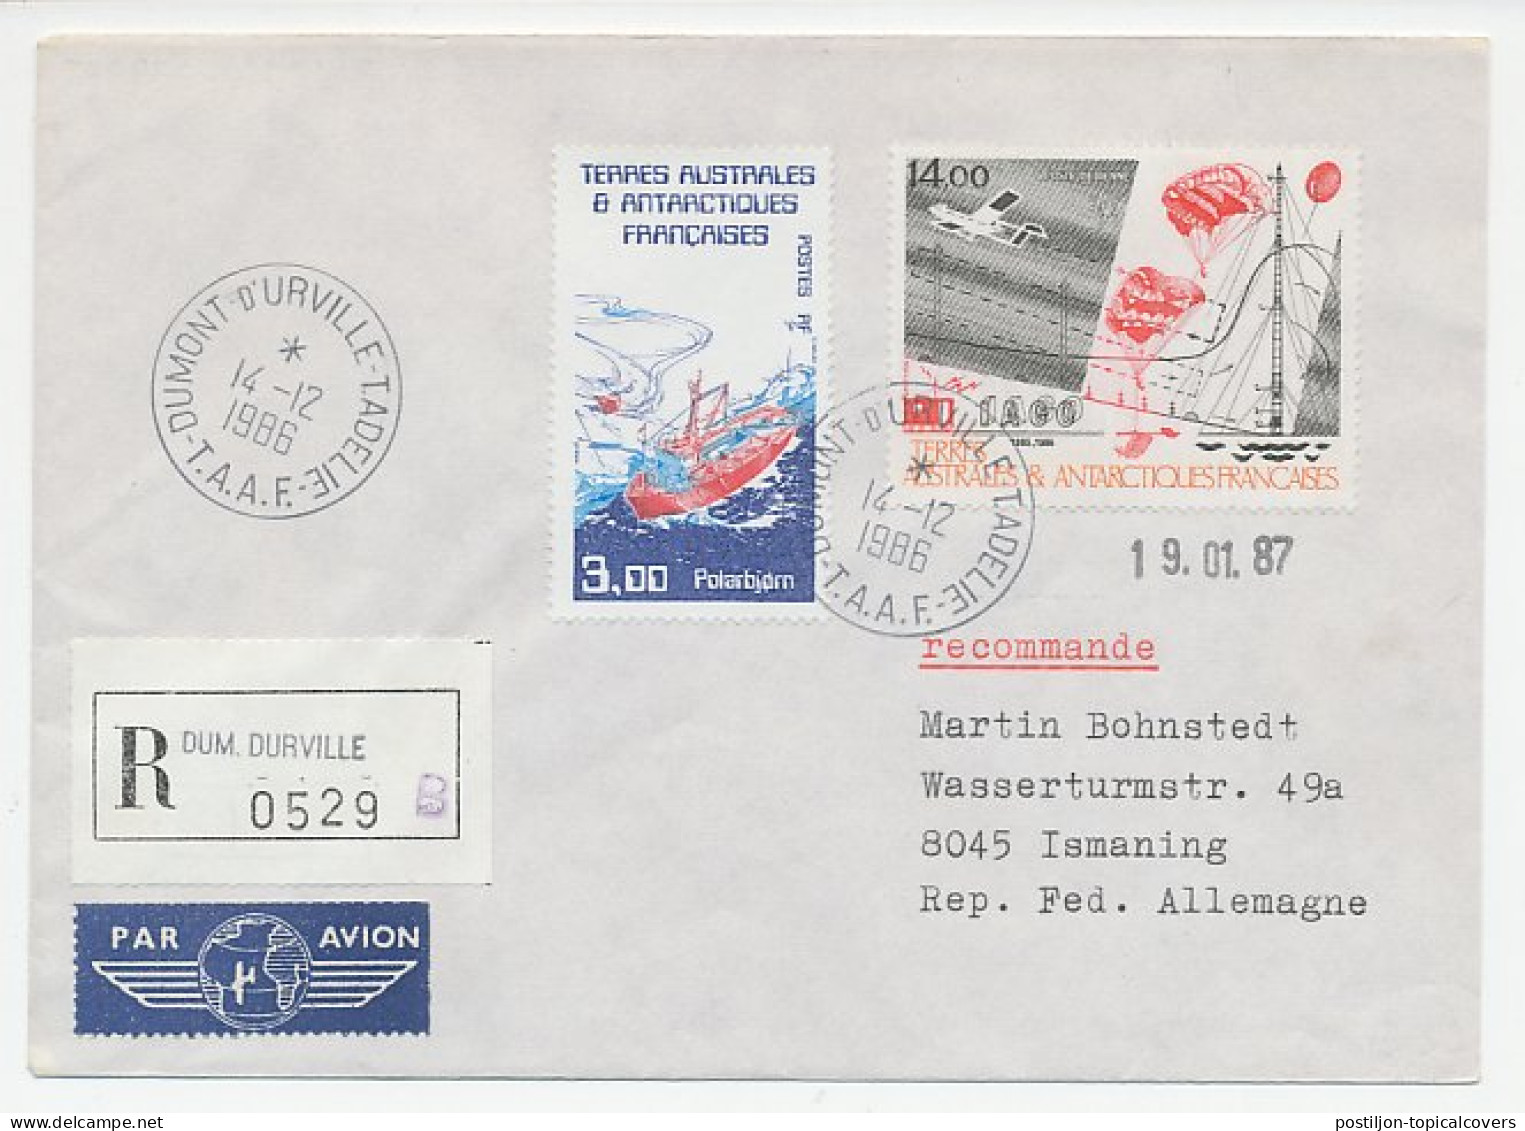 Registered Cover French Southern And Antarctic Territories 10.00 - Arktis Expeditionen